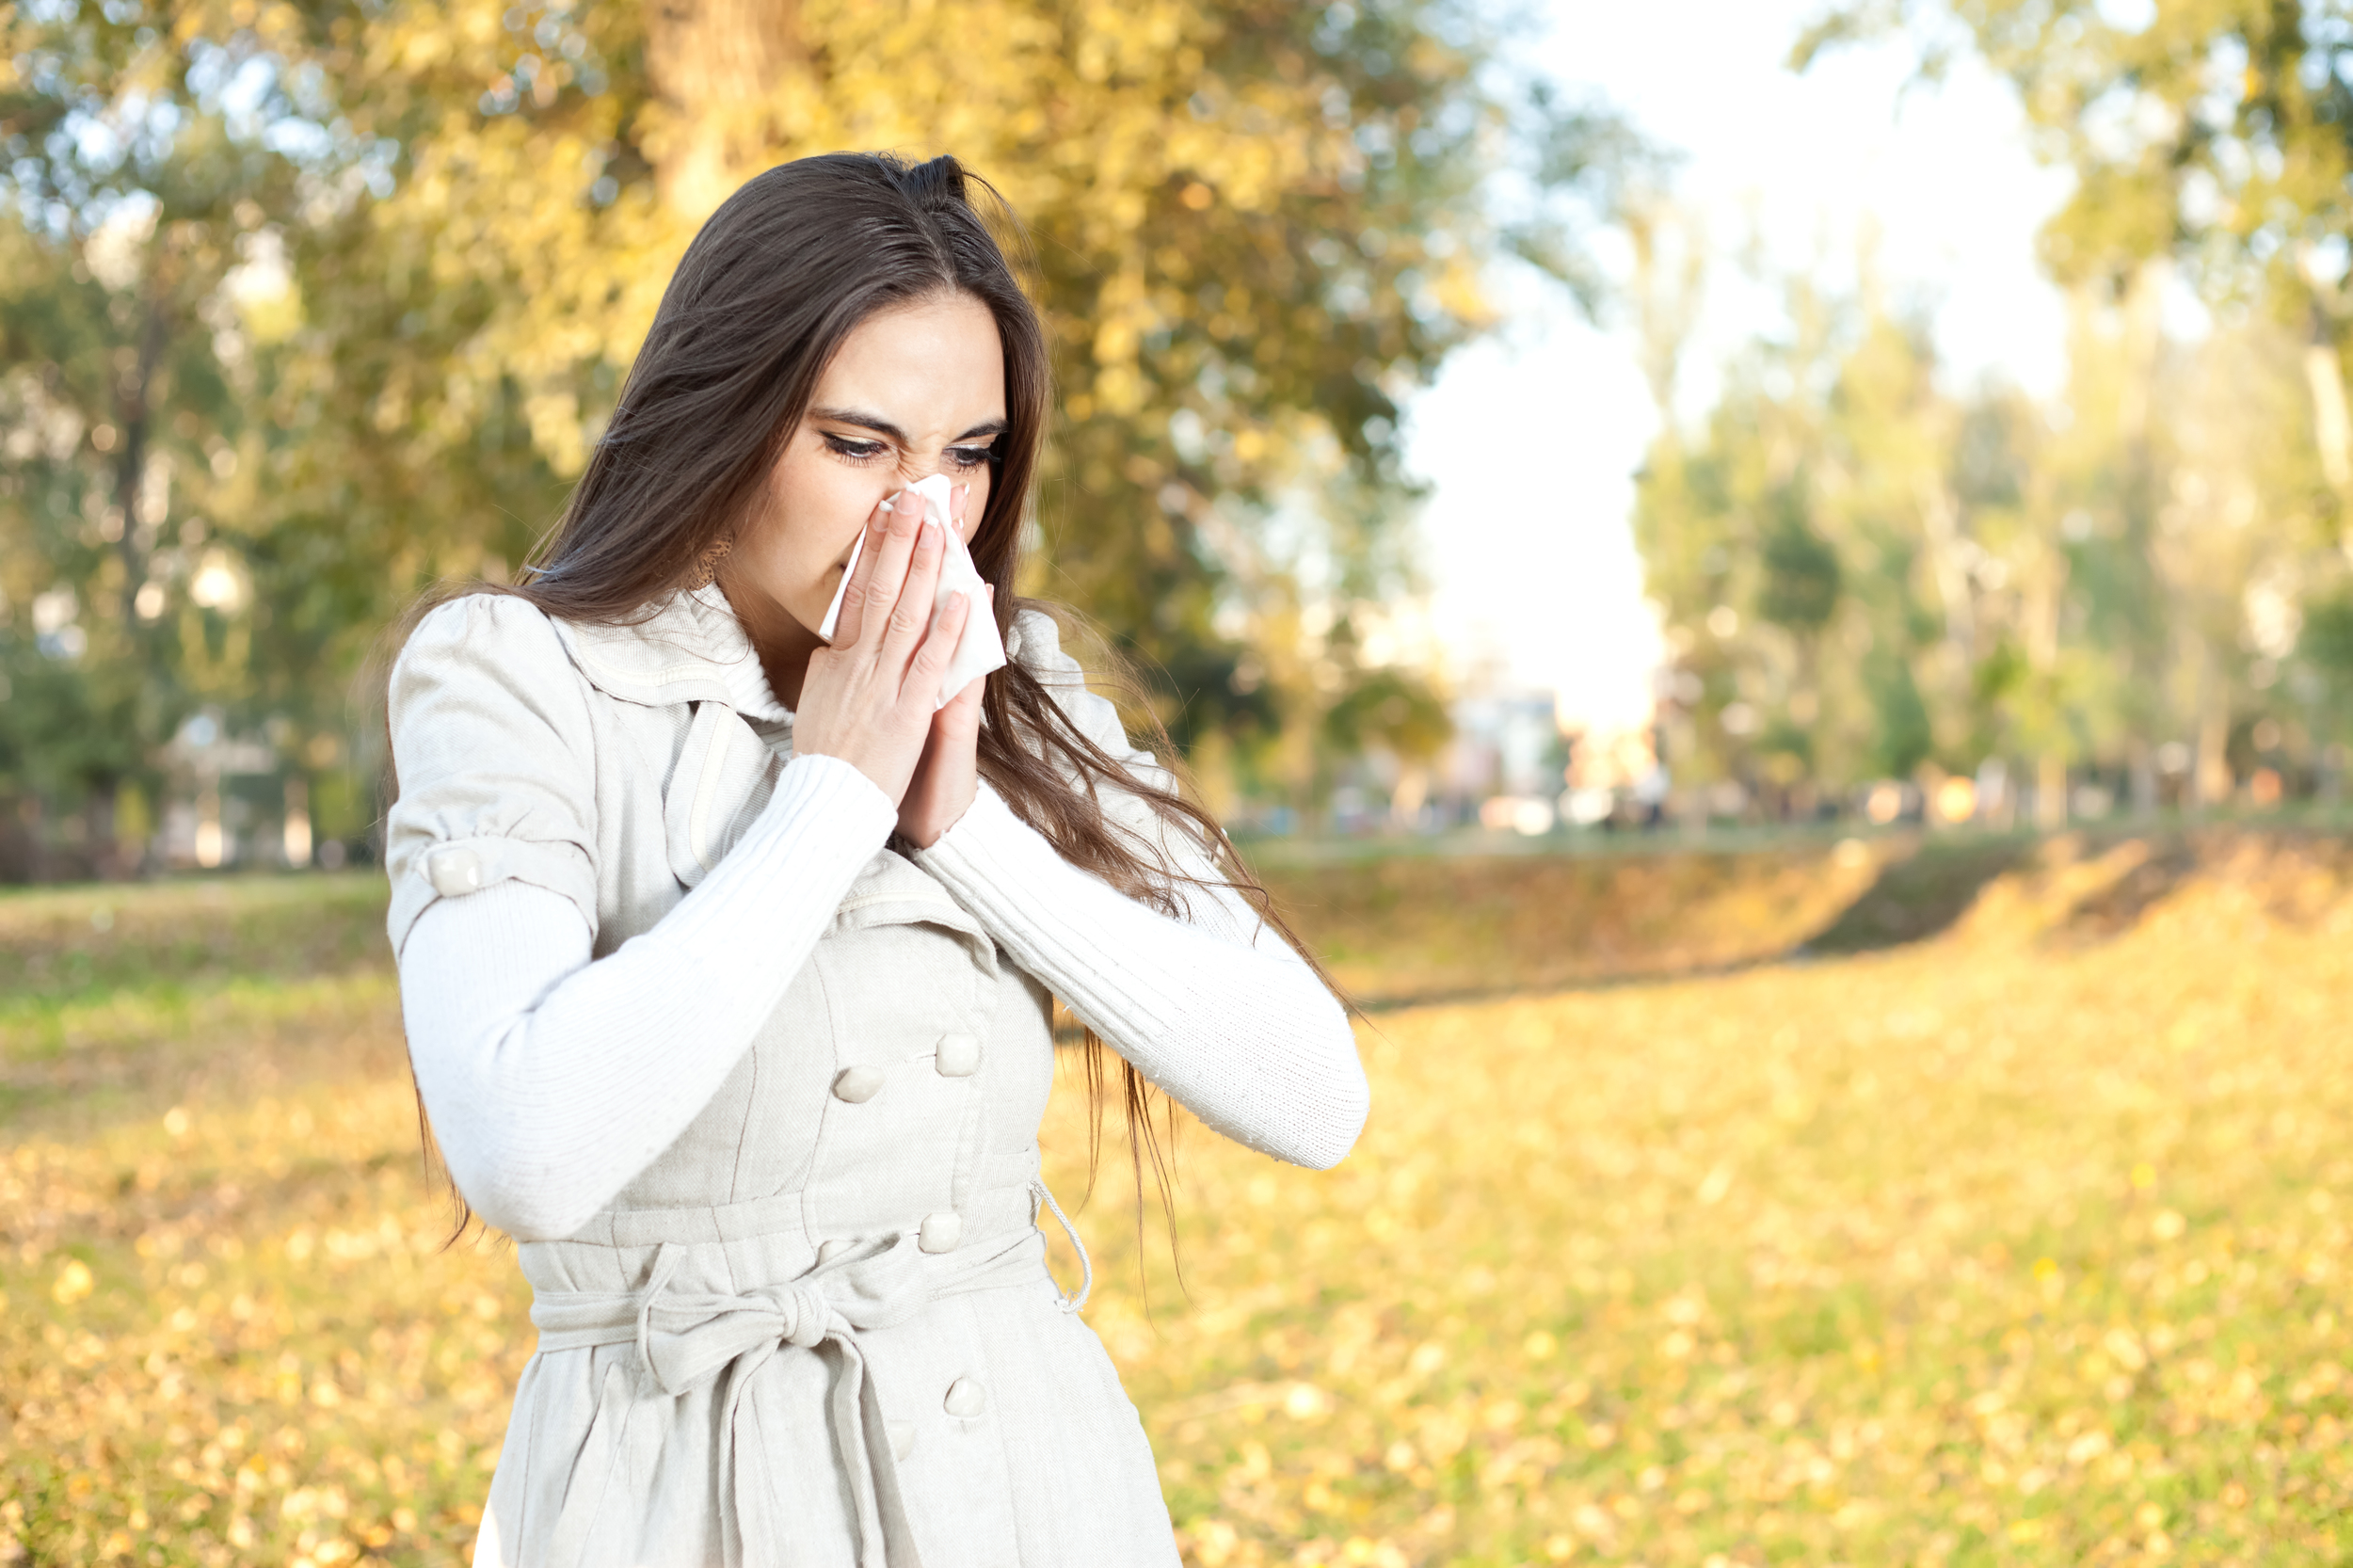 Ragweed, mold spores, dust mites and other bugs can cause fall allergies. (Photo: N.J. Allergy Doctors)